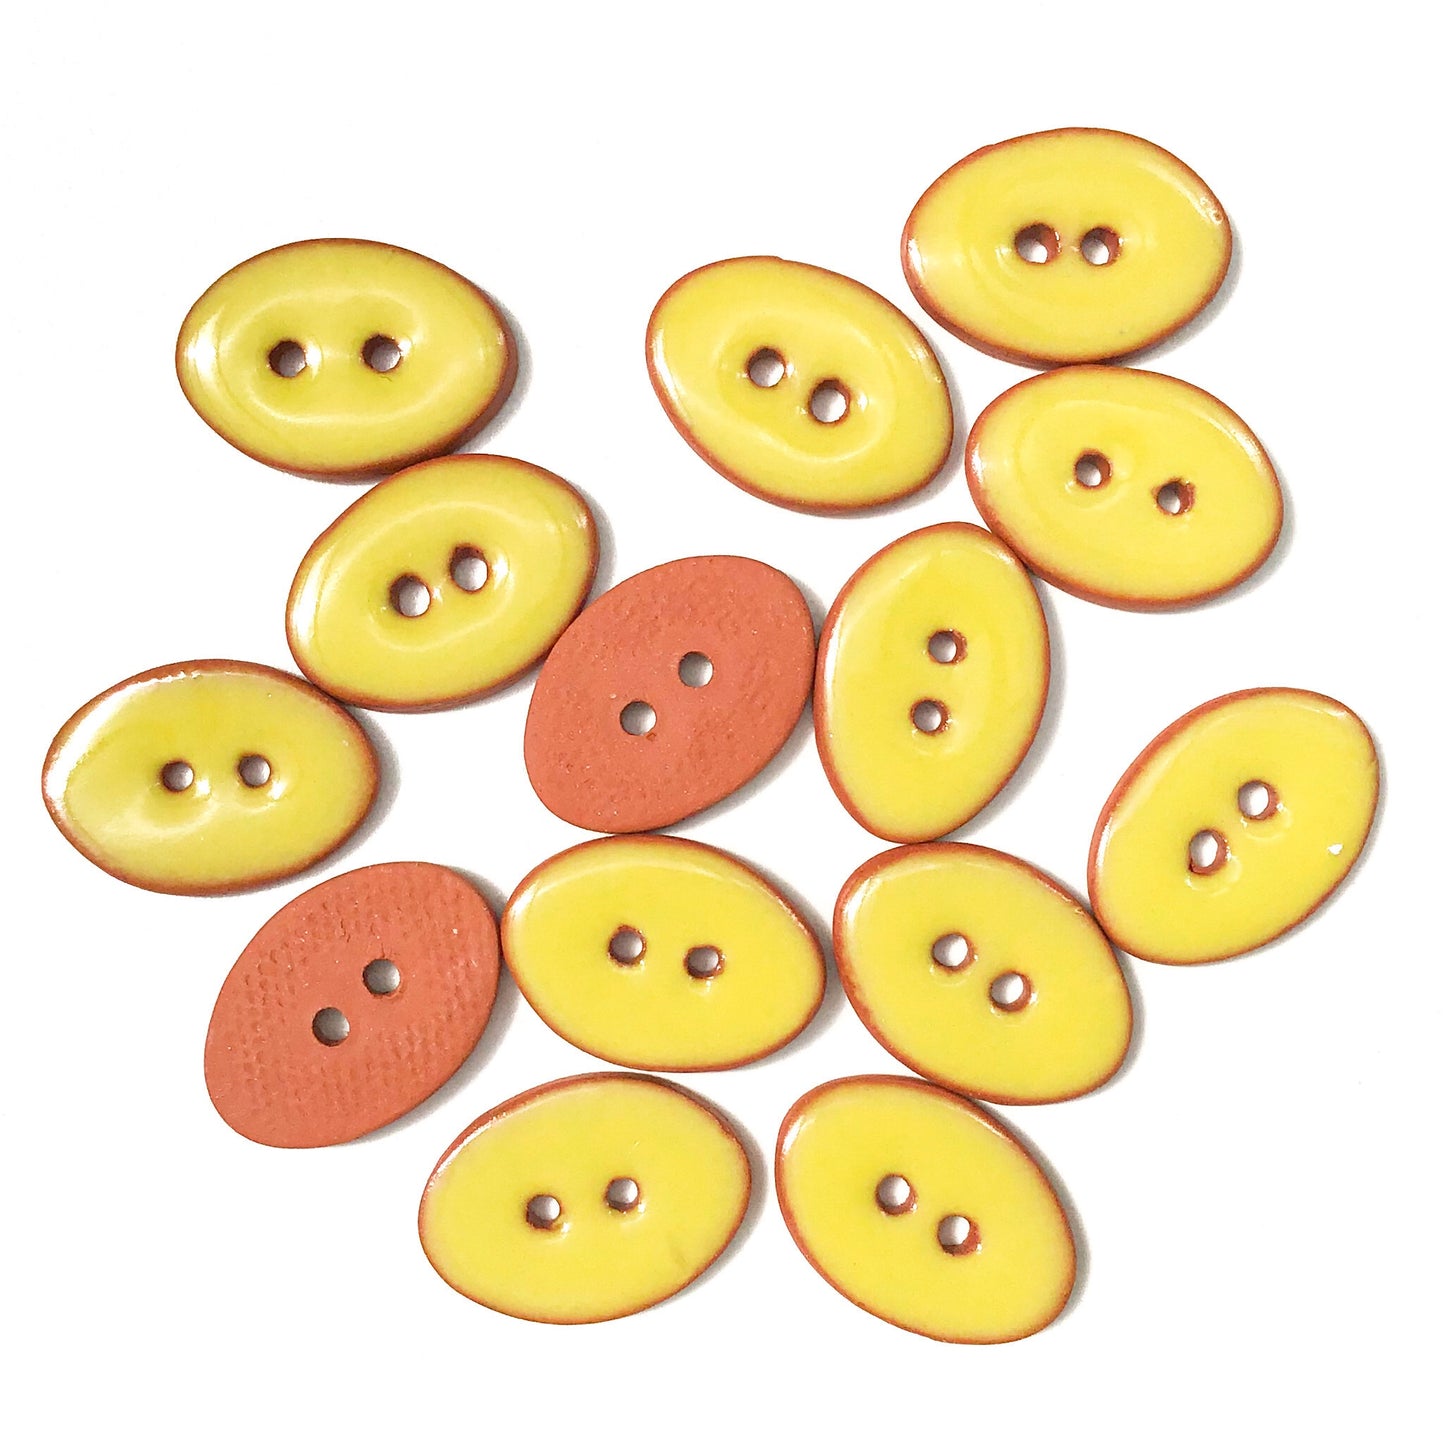 Chartreuse Oval Clay Buttons on Terracotta - 5/8" x 7/8" - 7 Pack (ws-49)